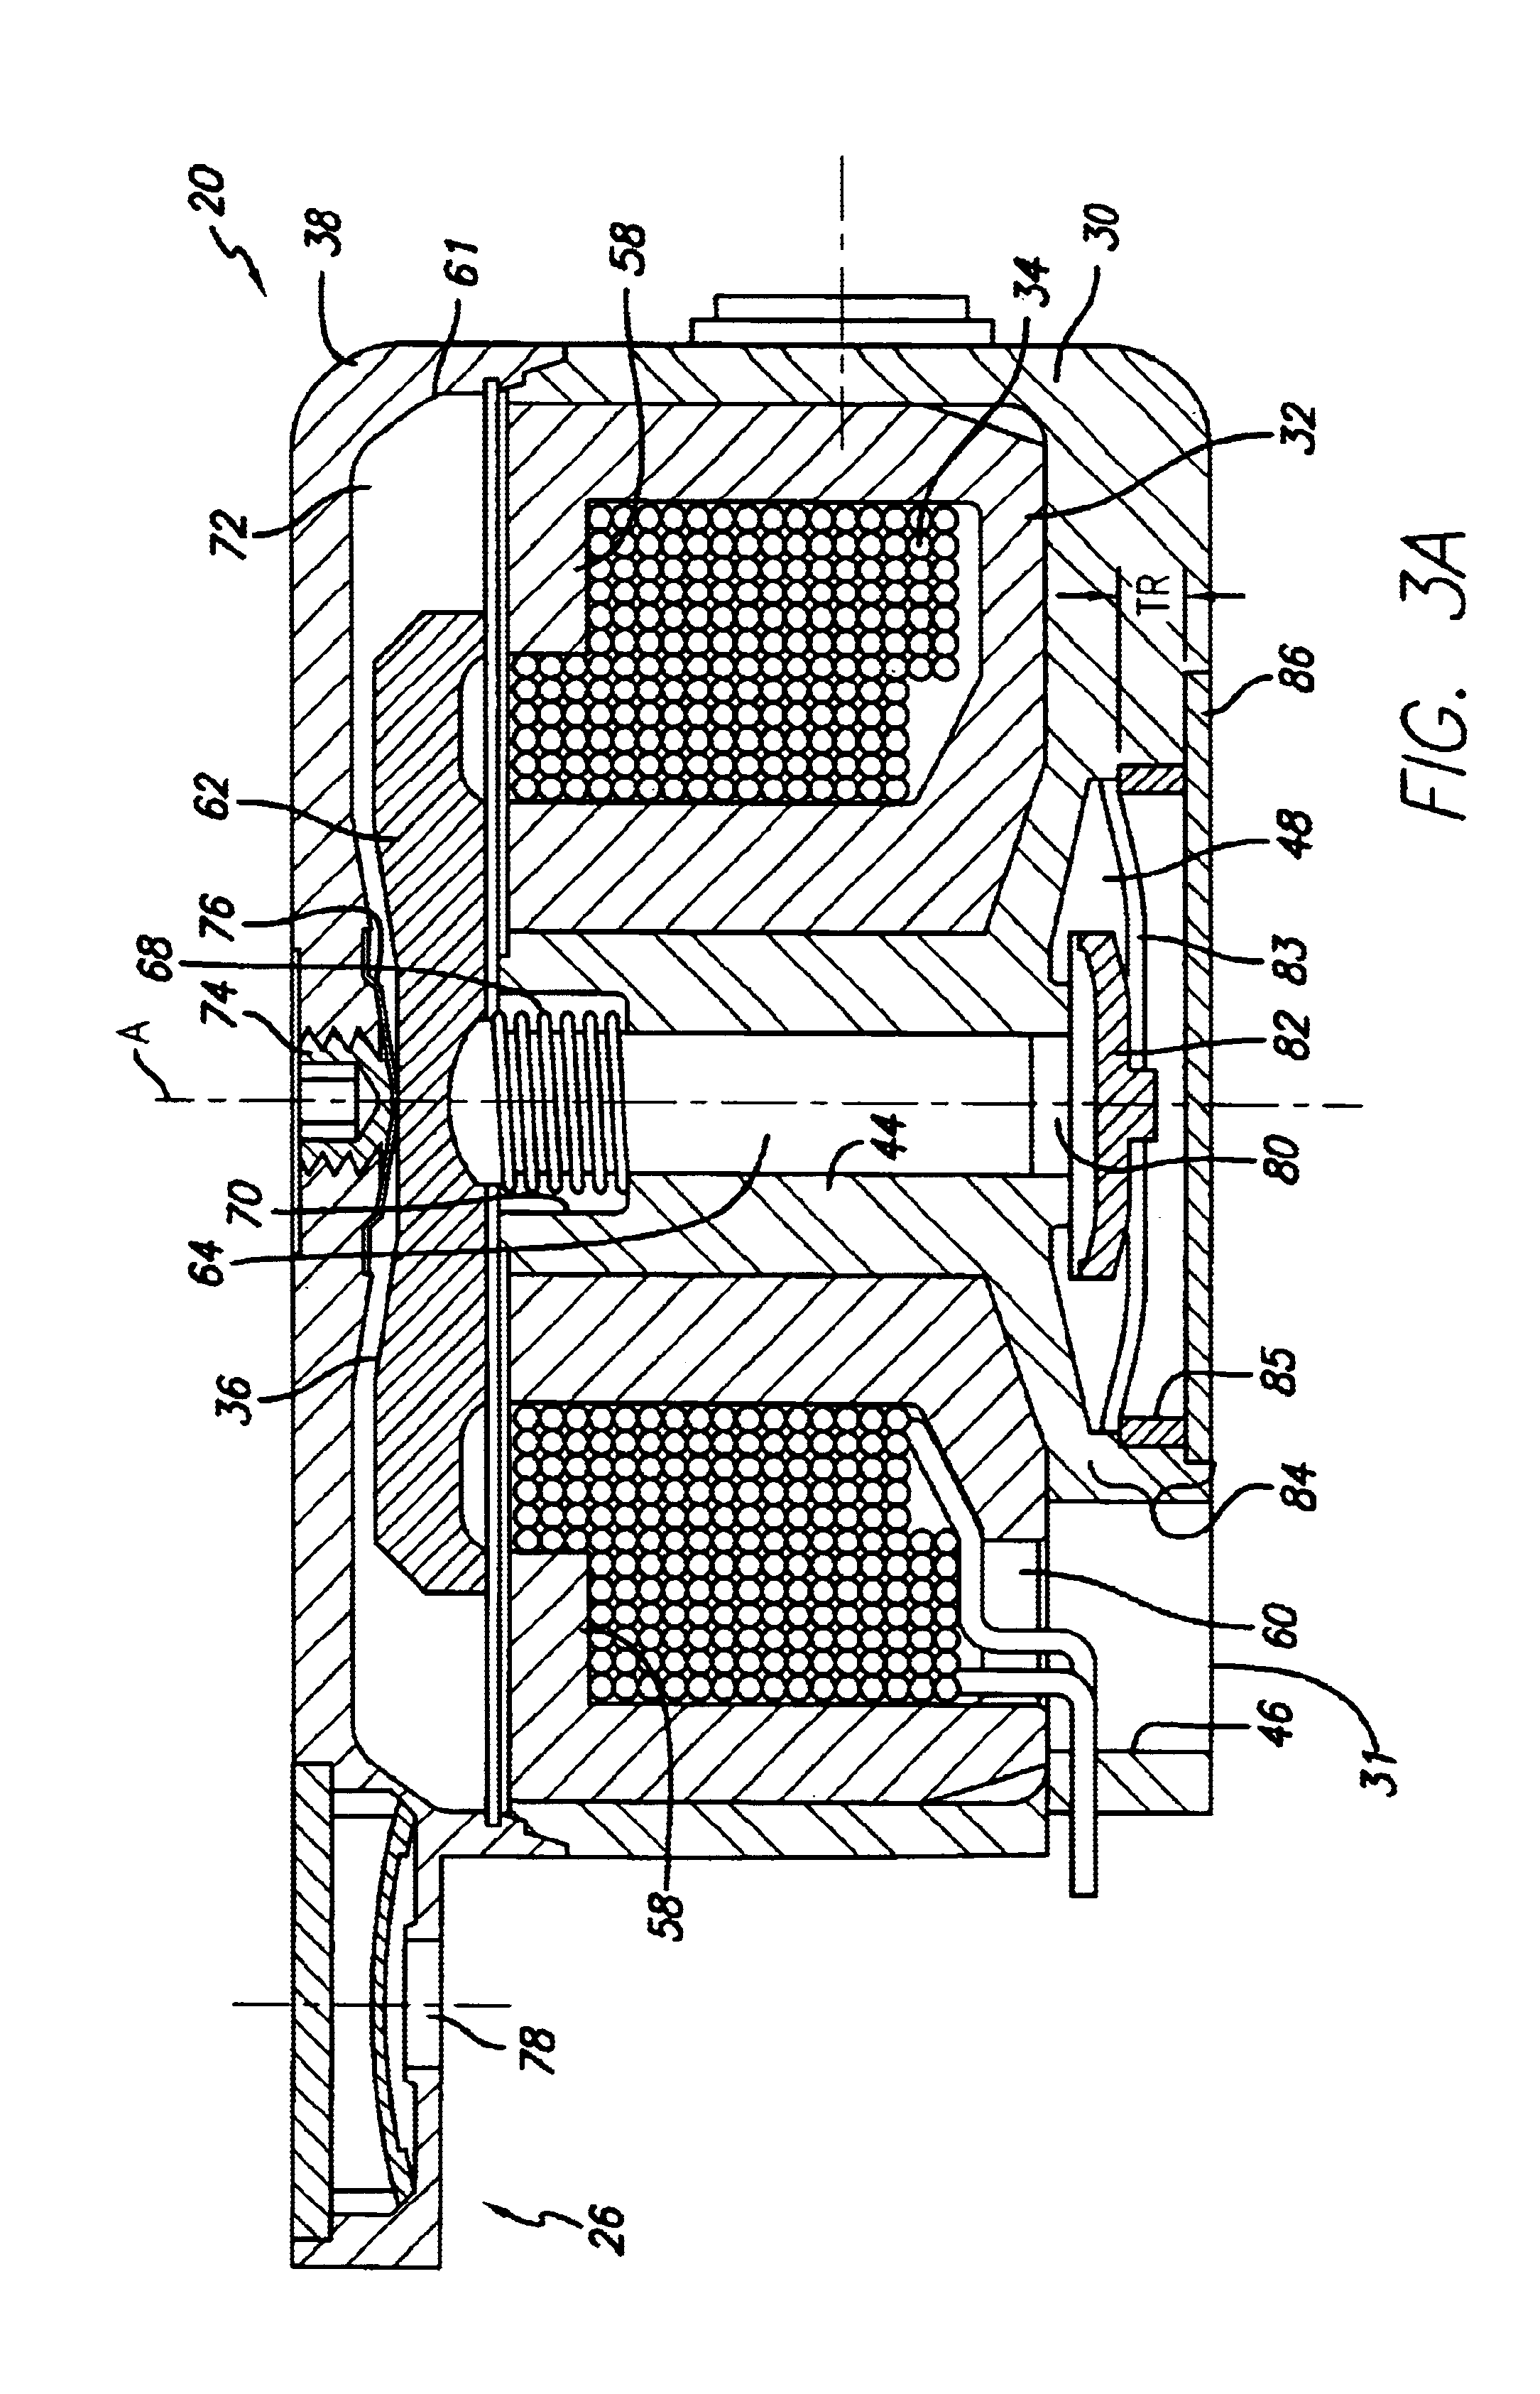 Infusion device and driving mechanism and process for same with actuator for multiple infusion uses